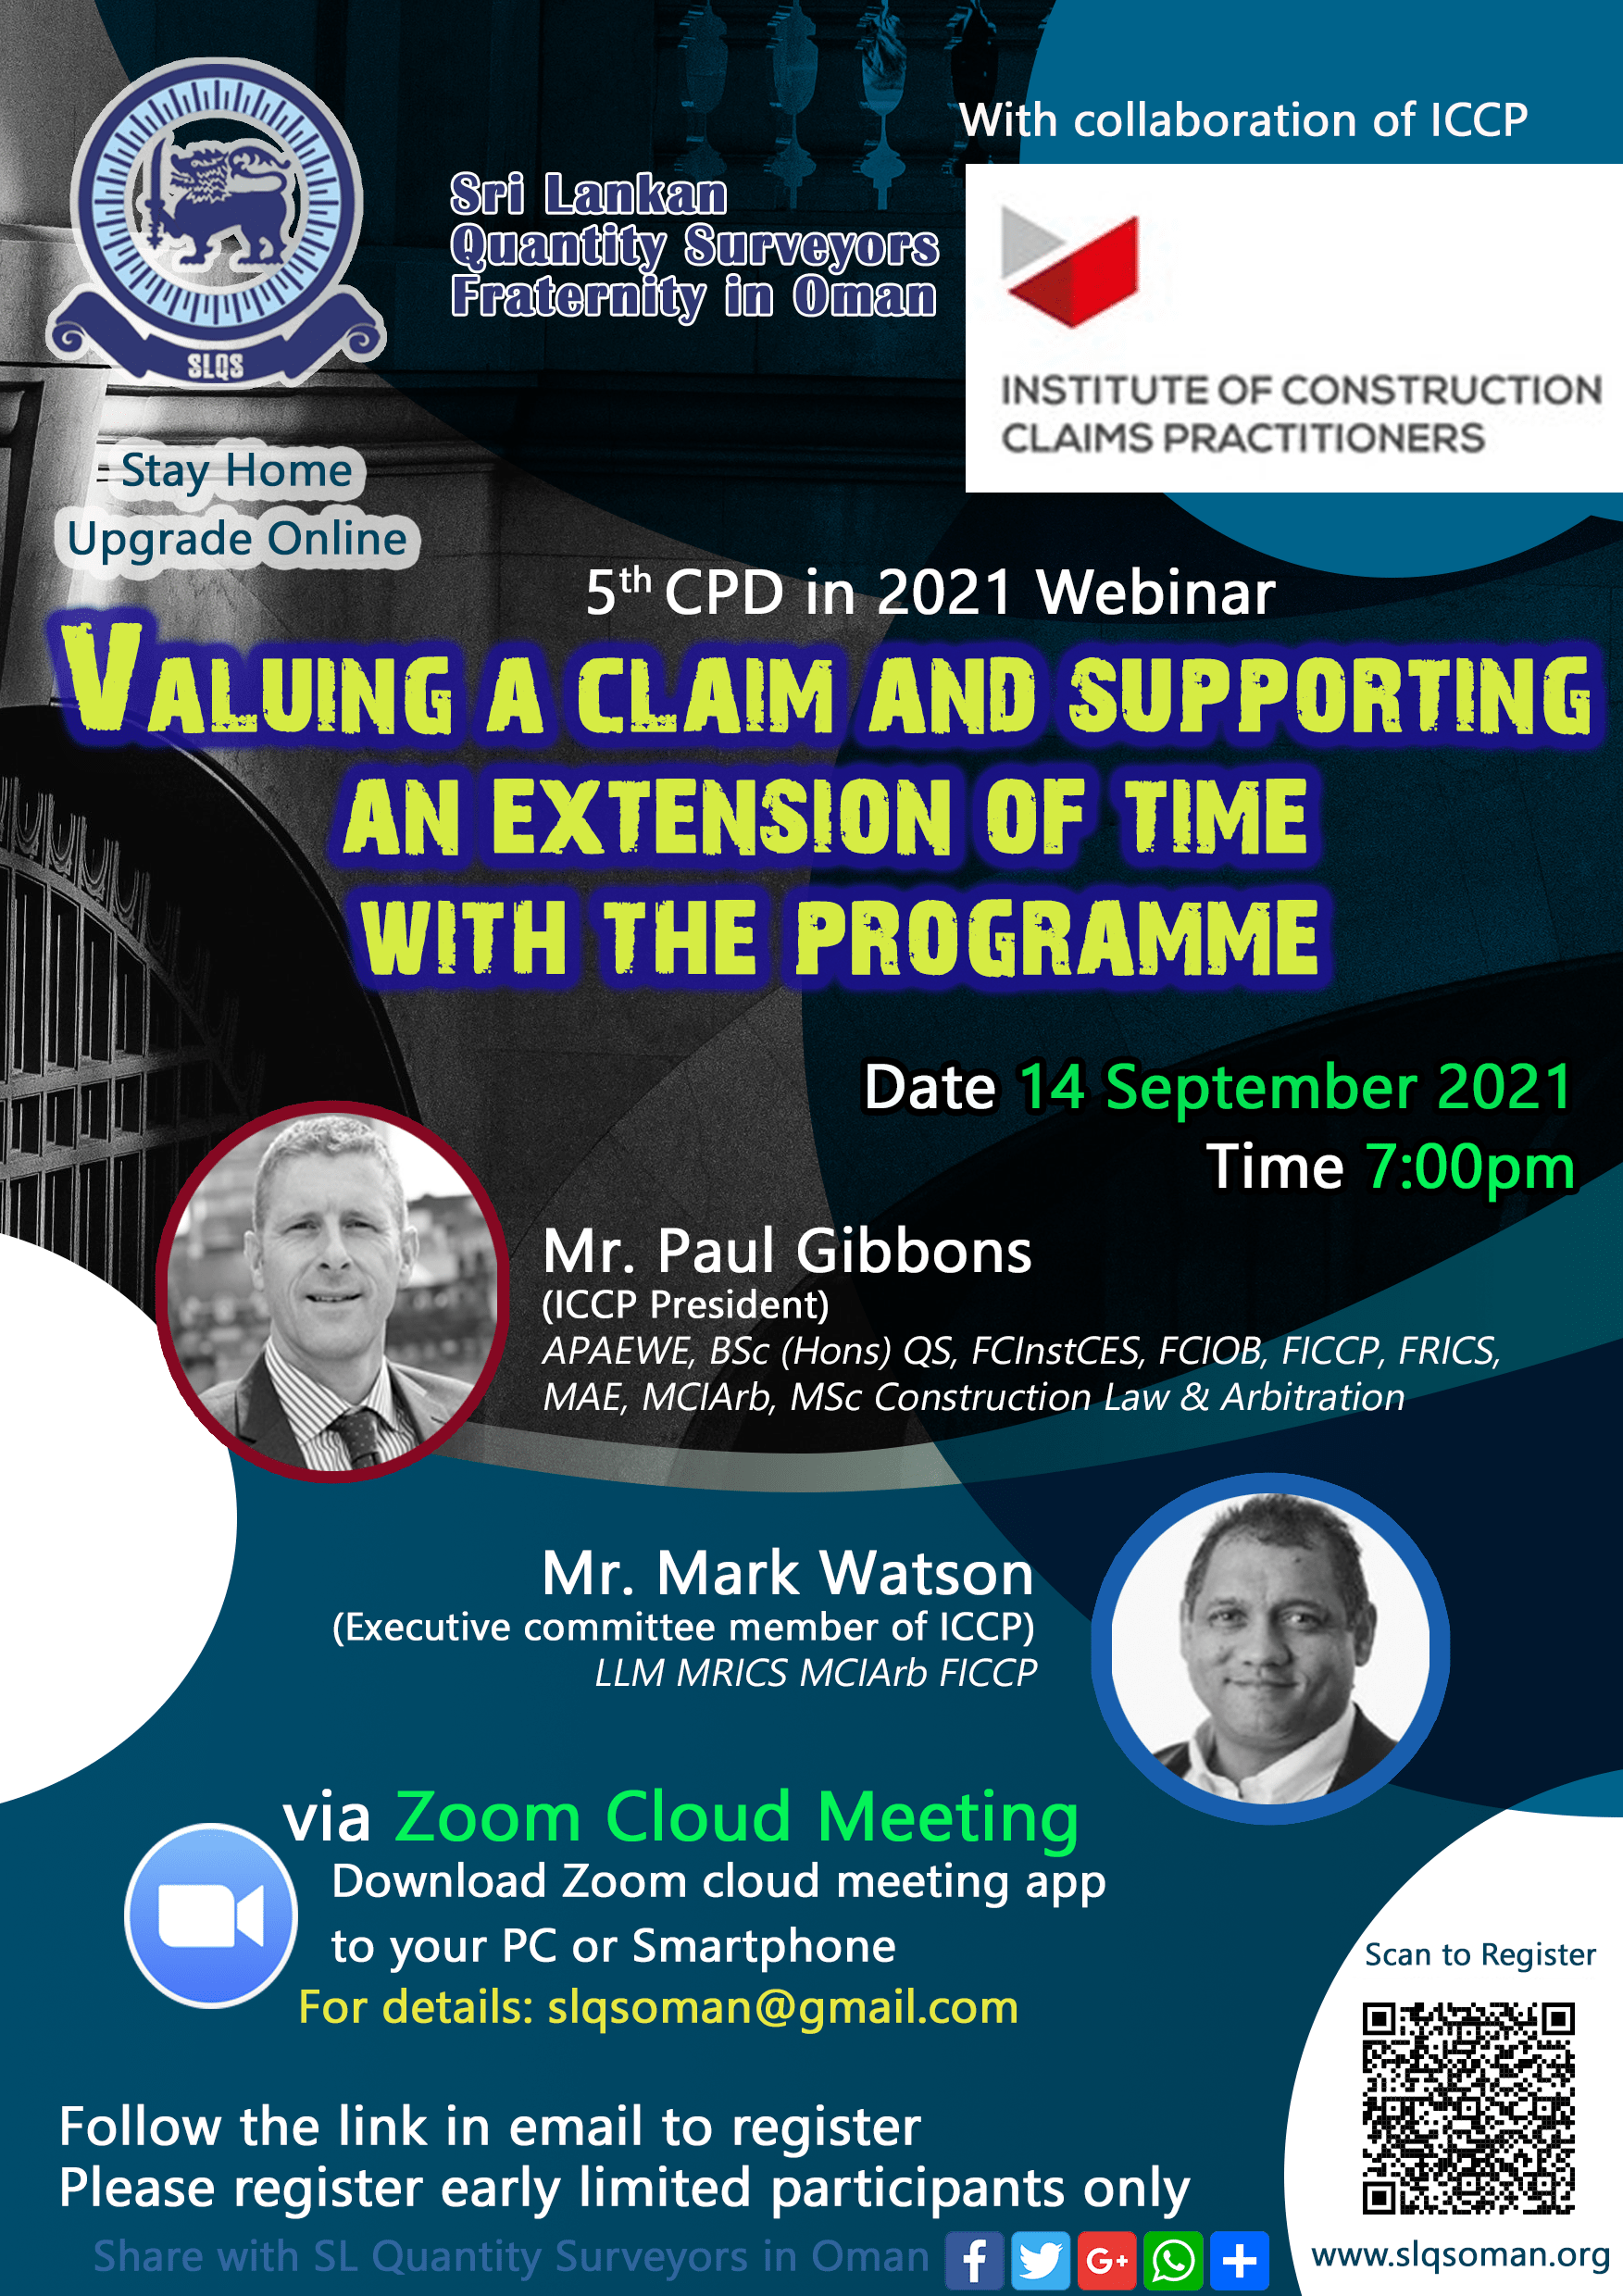 5th CPD in 2021 : Valuing a Claim and Supporting an Extension of Time with the Programme (With collaboration of ICCP)